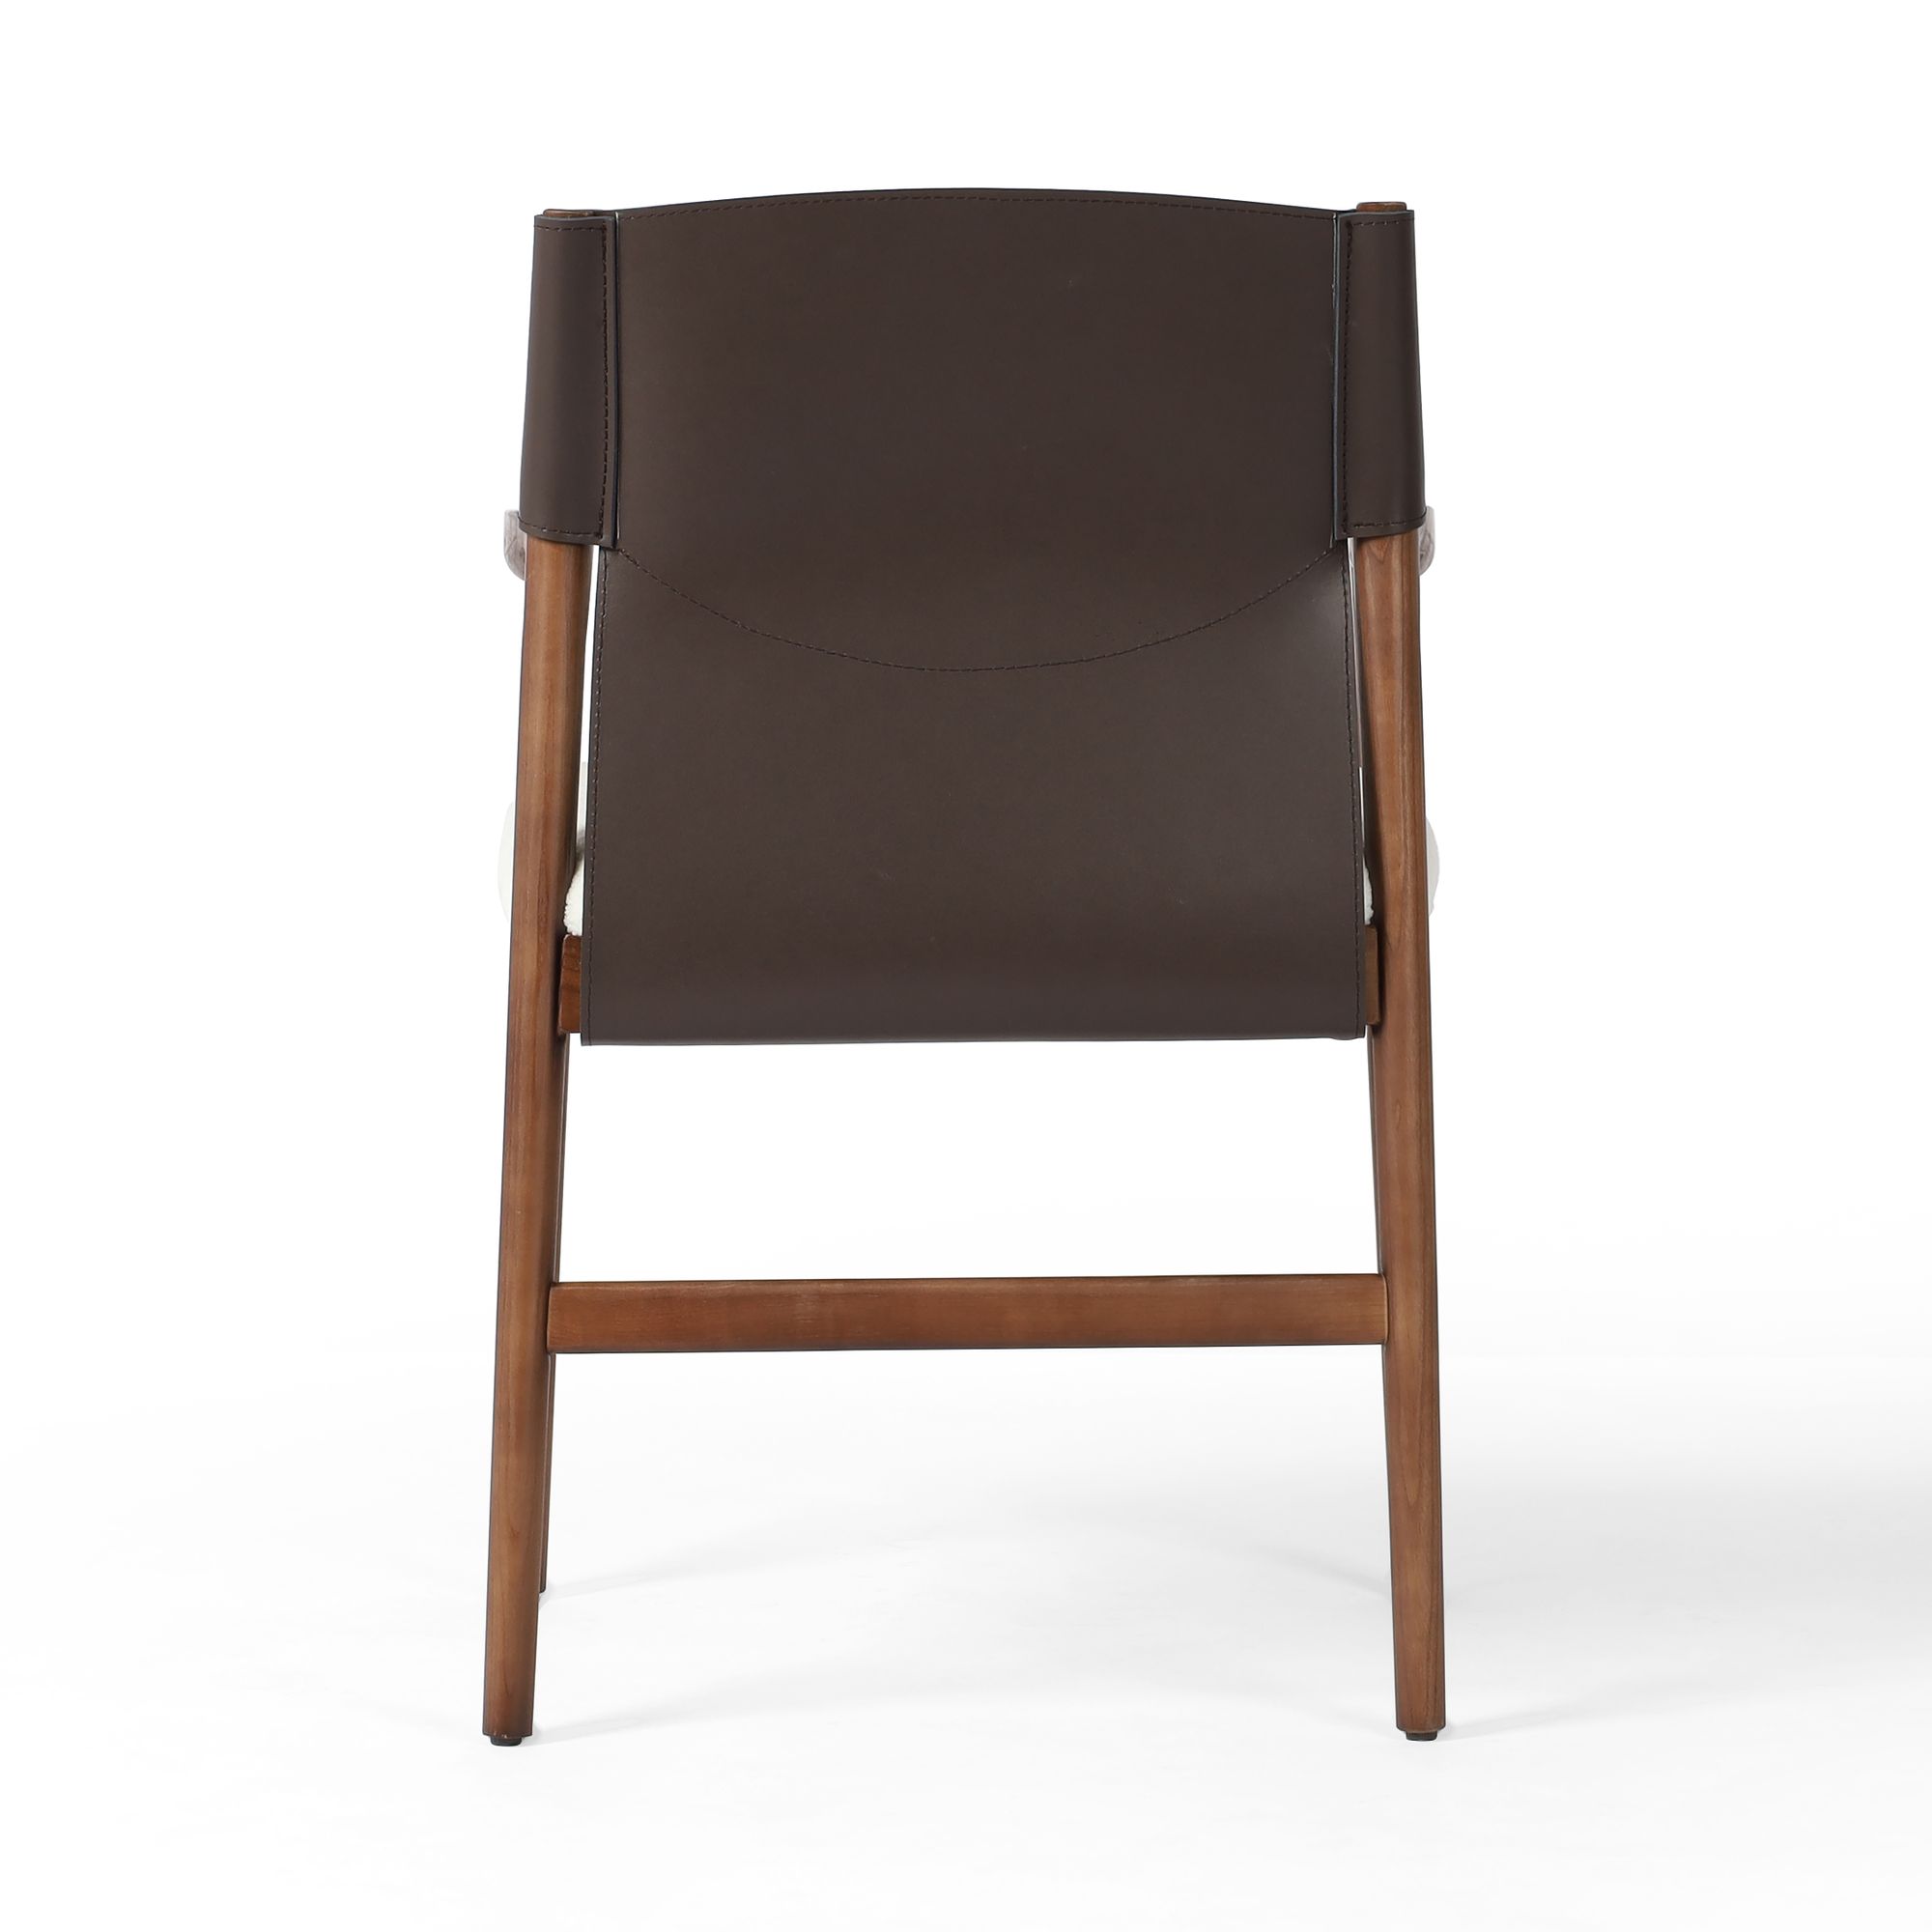 Lulu Dining Chair-Espresso Leather Blend at